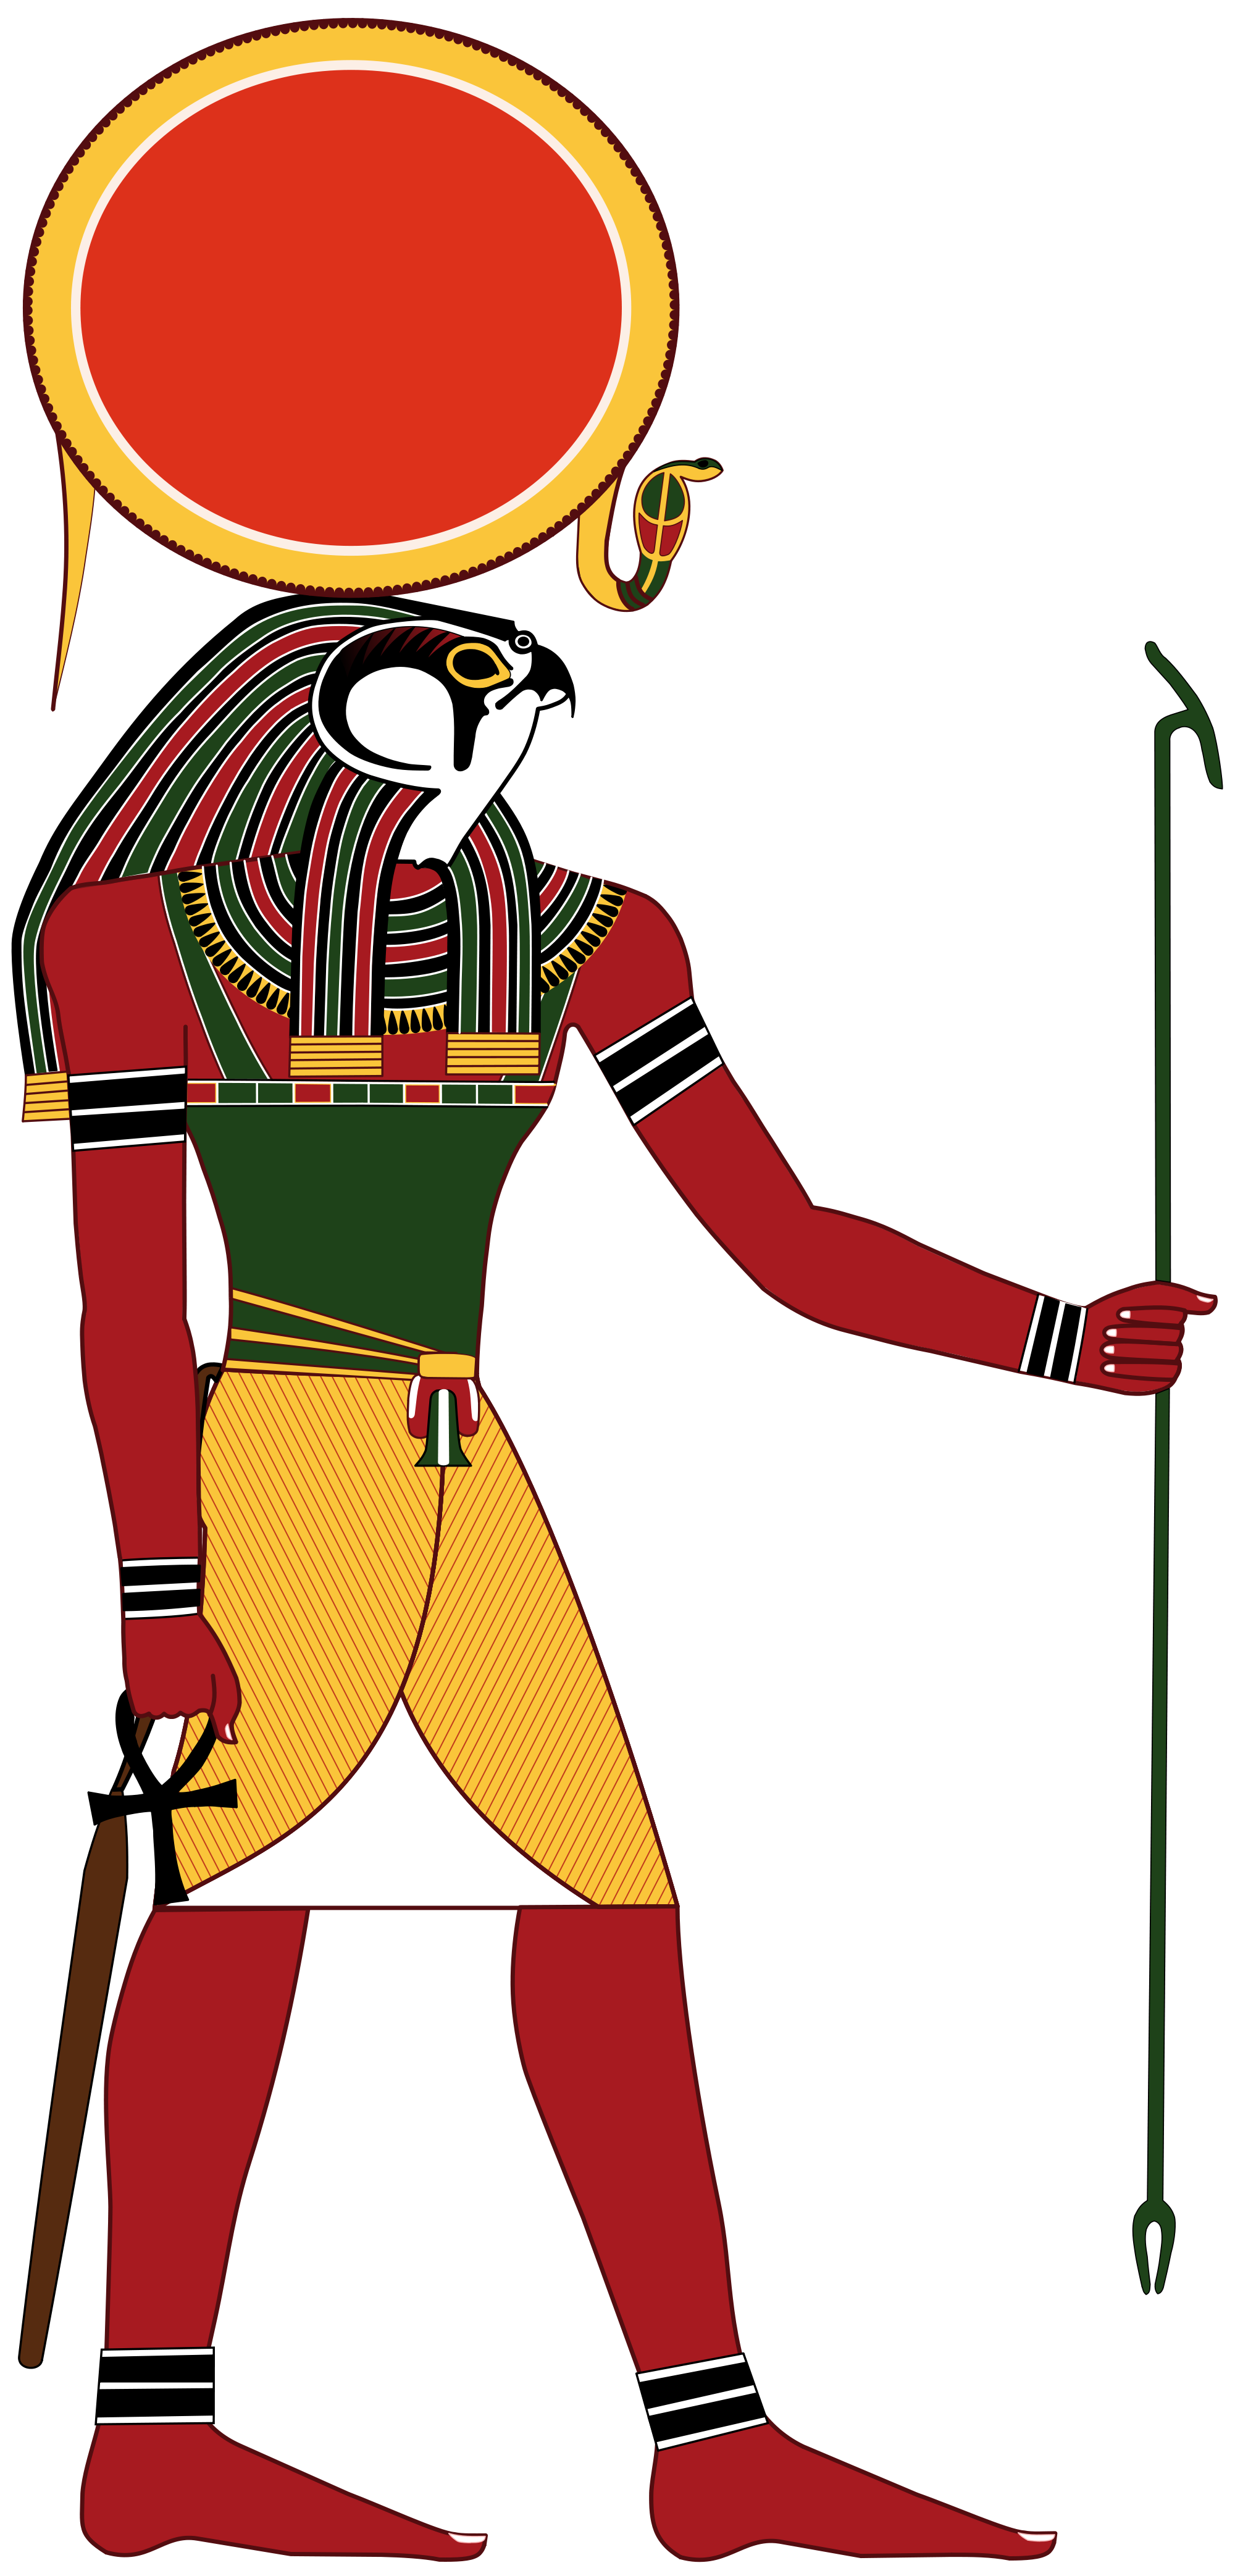 Top ten gods and. Egypt clipart egyptian crown